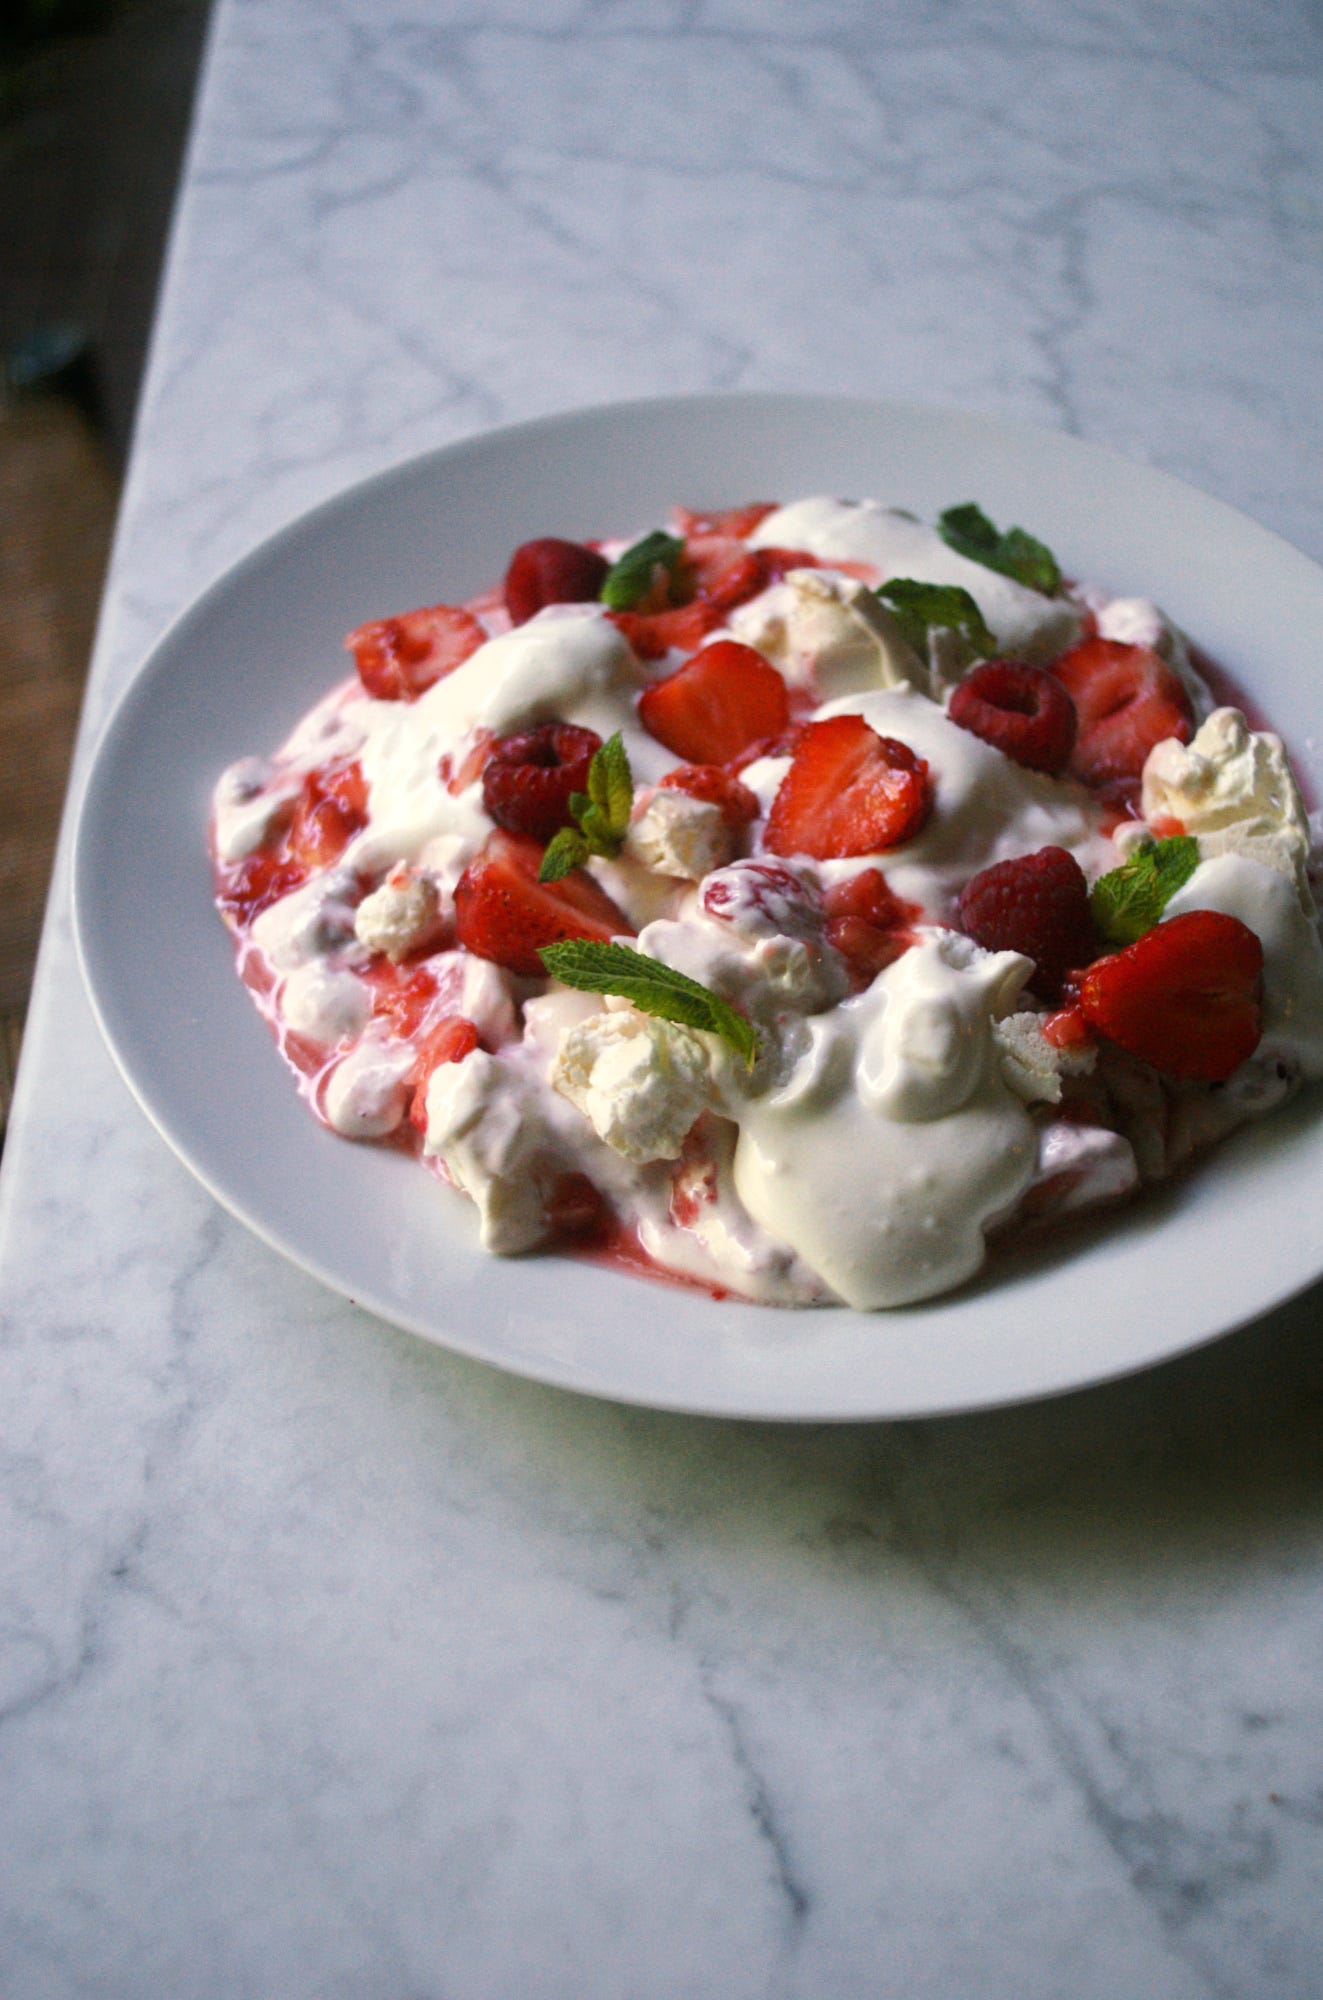 Eton mess From France with Love